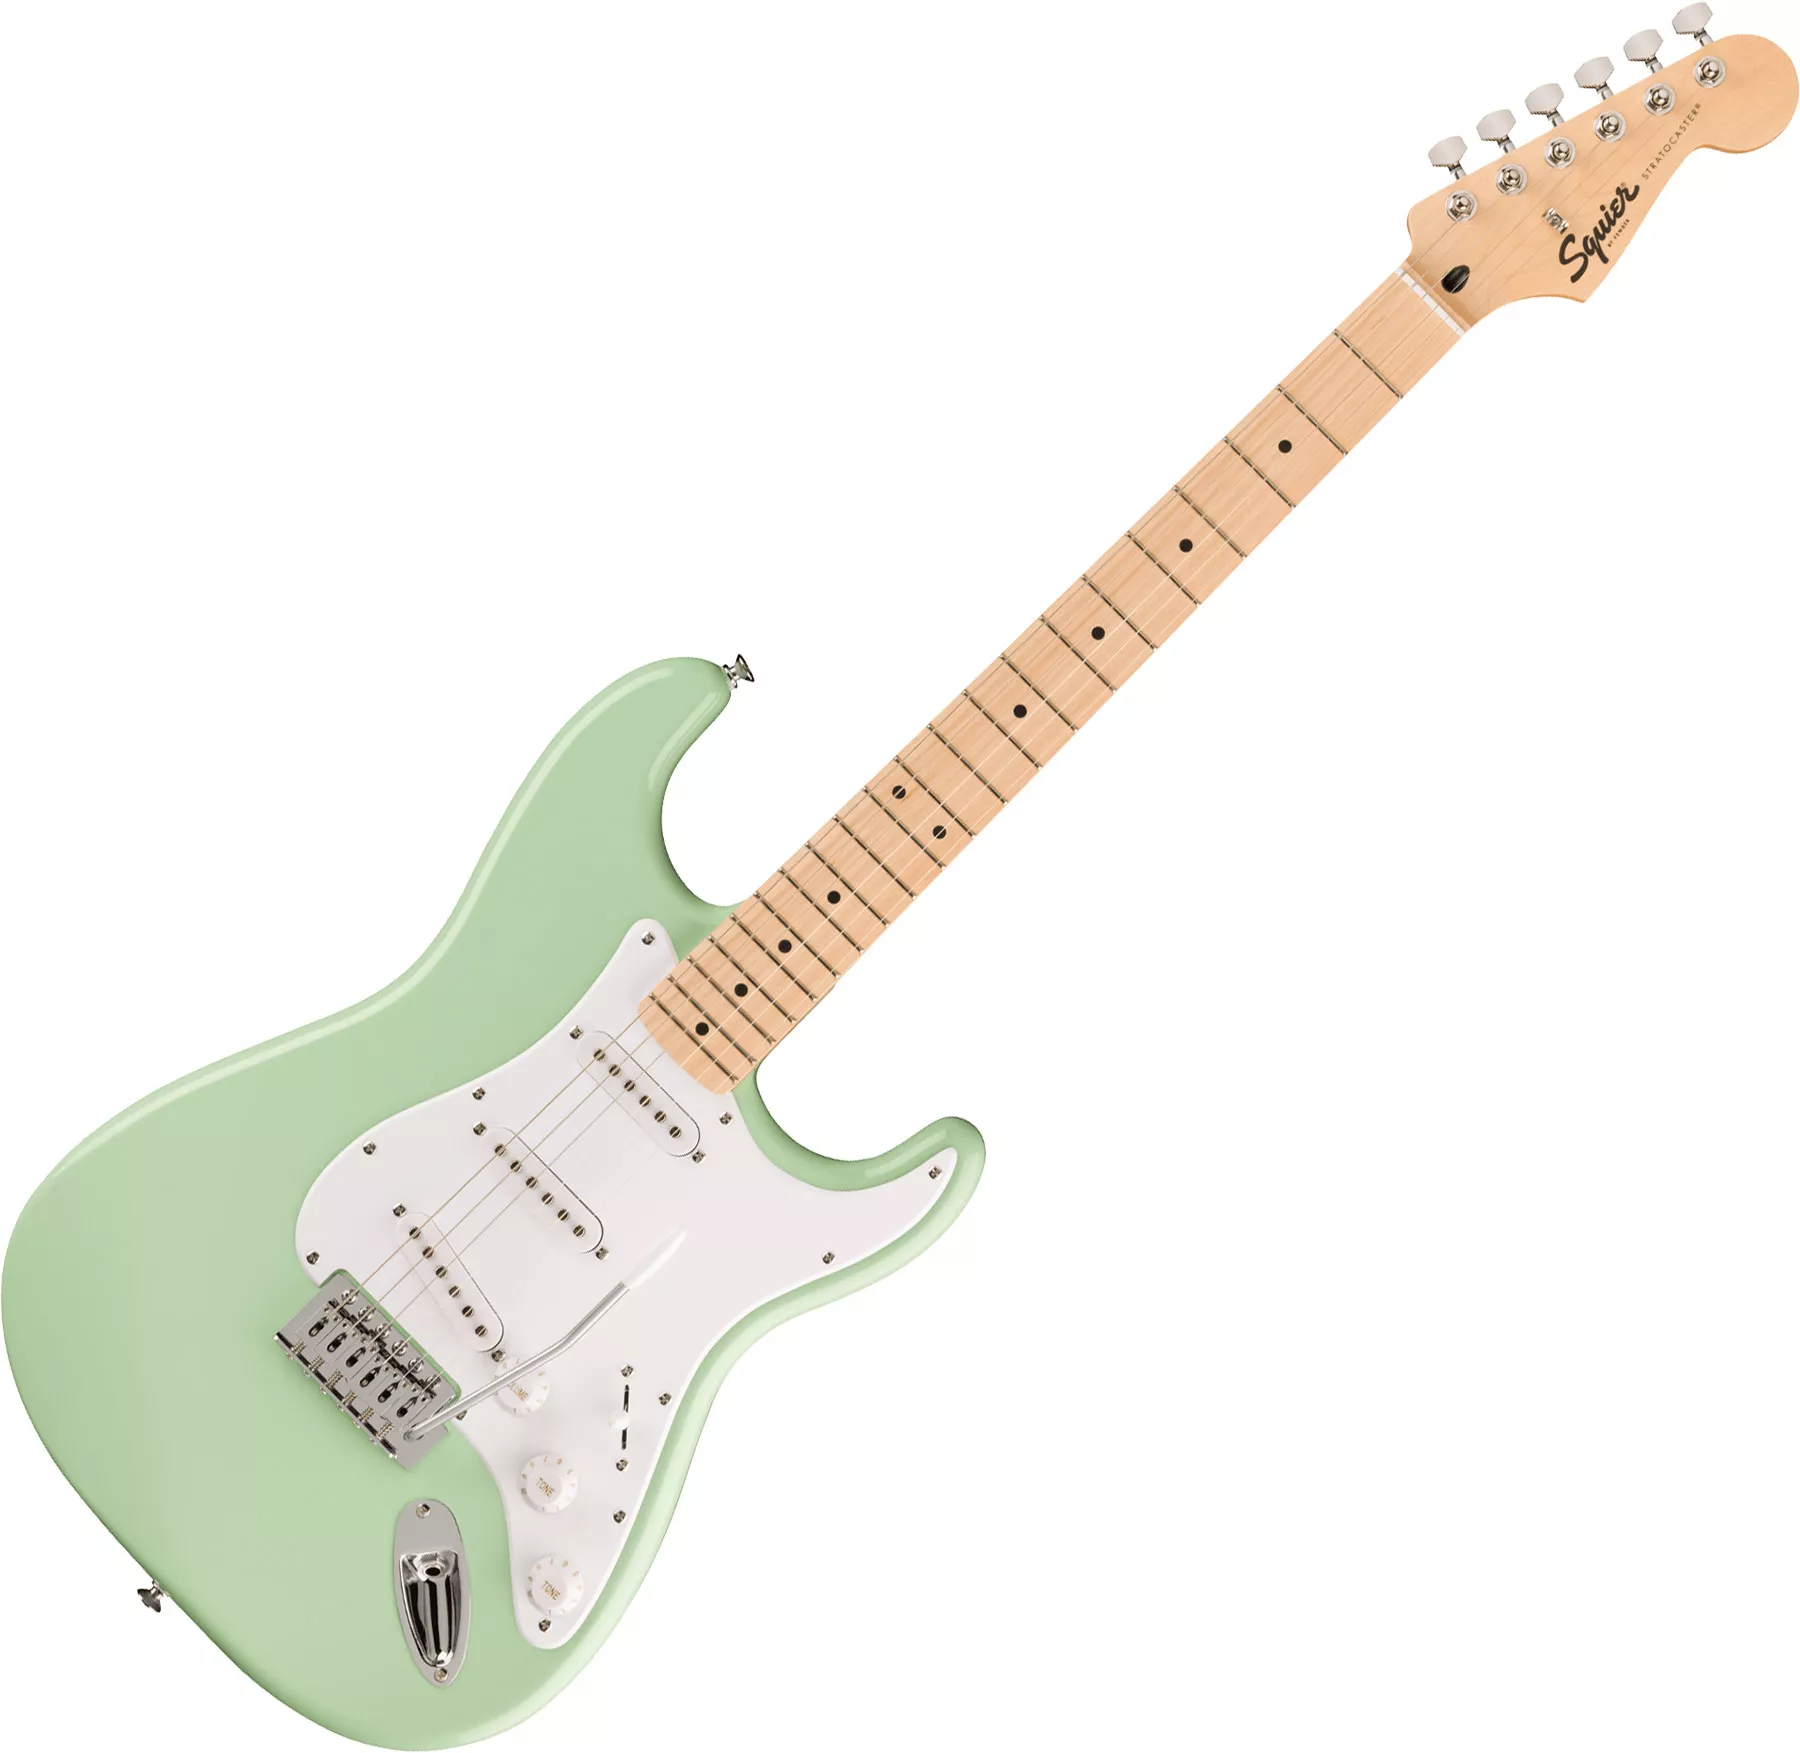 Squier Sonic Stratocaster (MN) - surf green Str shape electric